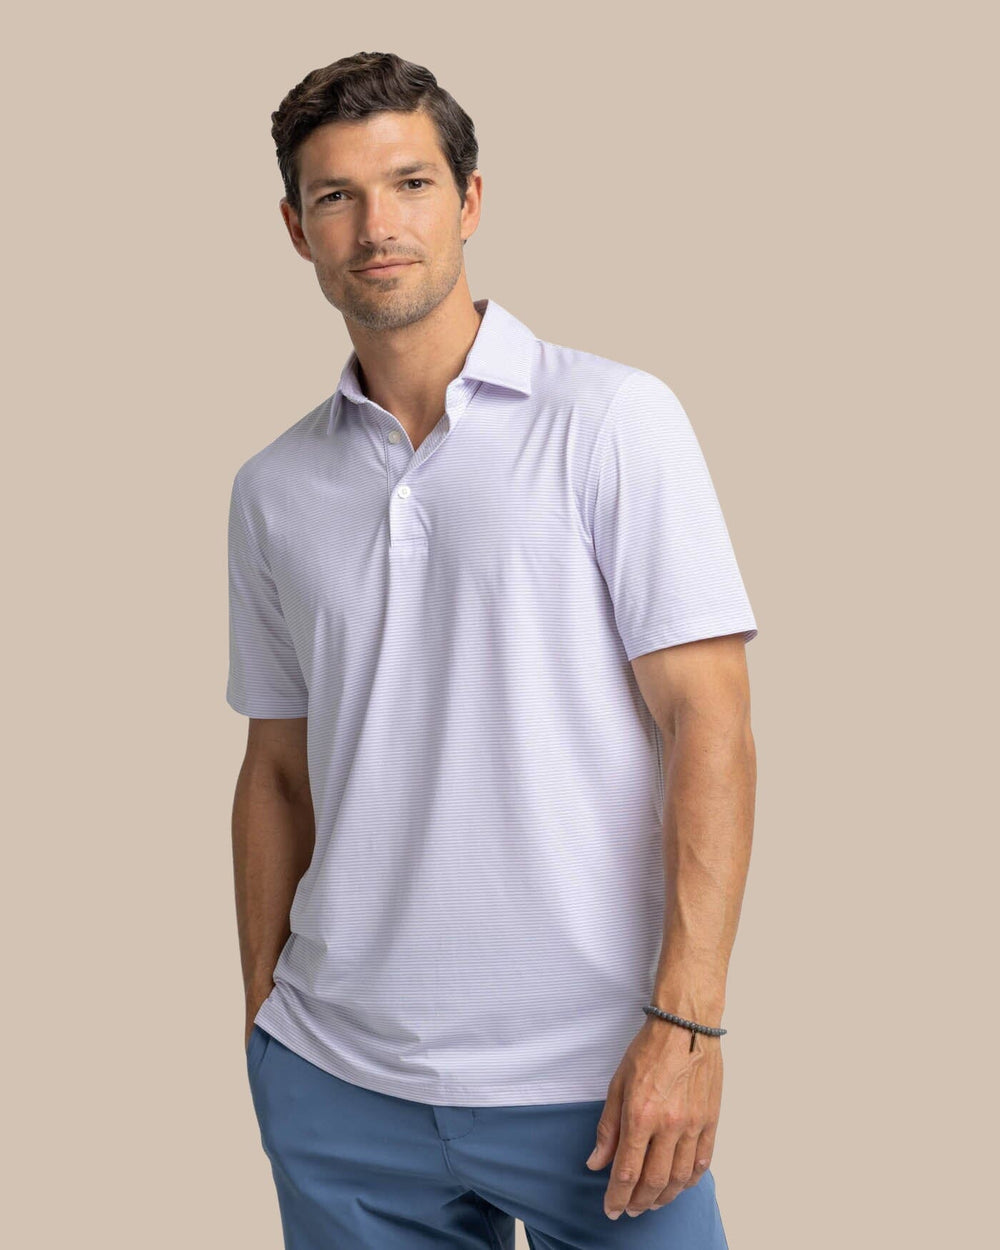 The front view of the Southern Tide brrr-eeze Meadowbrook Stripe Polo by Southern Tide - Orchid Petal